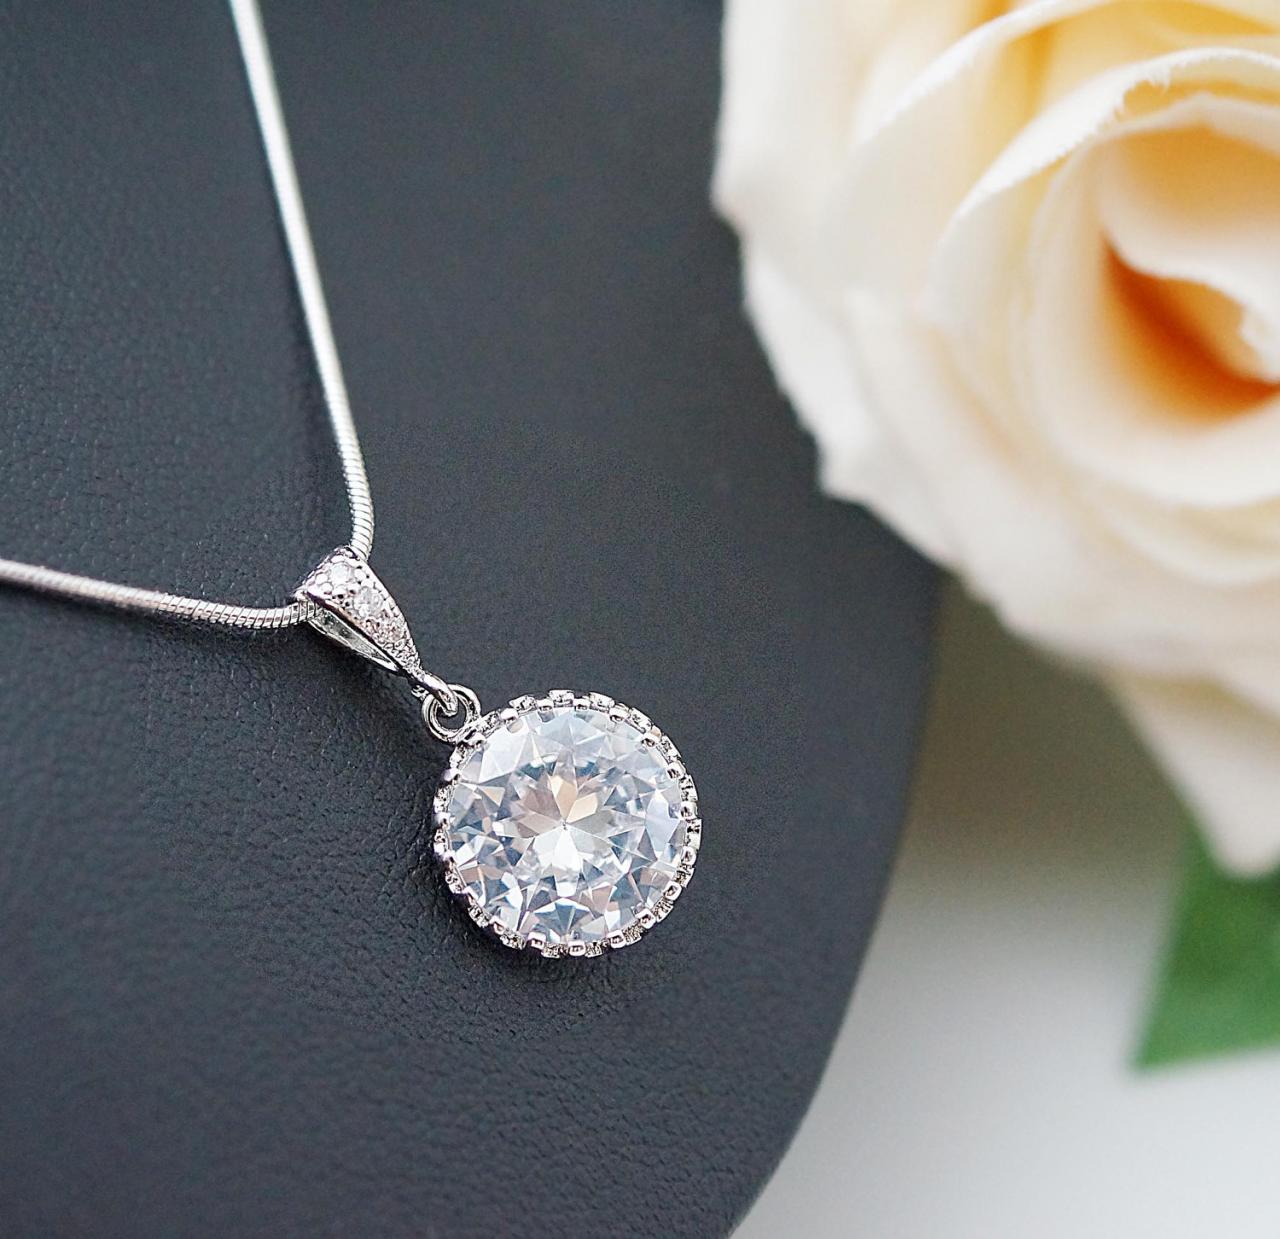 Wedding Jewelry Bridesmaid Necklace Bridesmaid Jewelry Clear White Round Cubic Zirconia Crystal Drops Bridesmaid Gifts